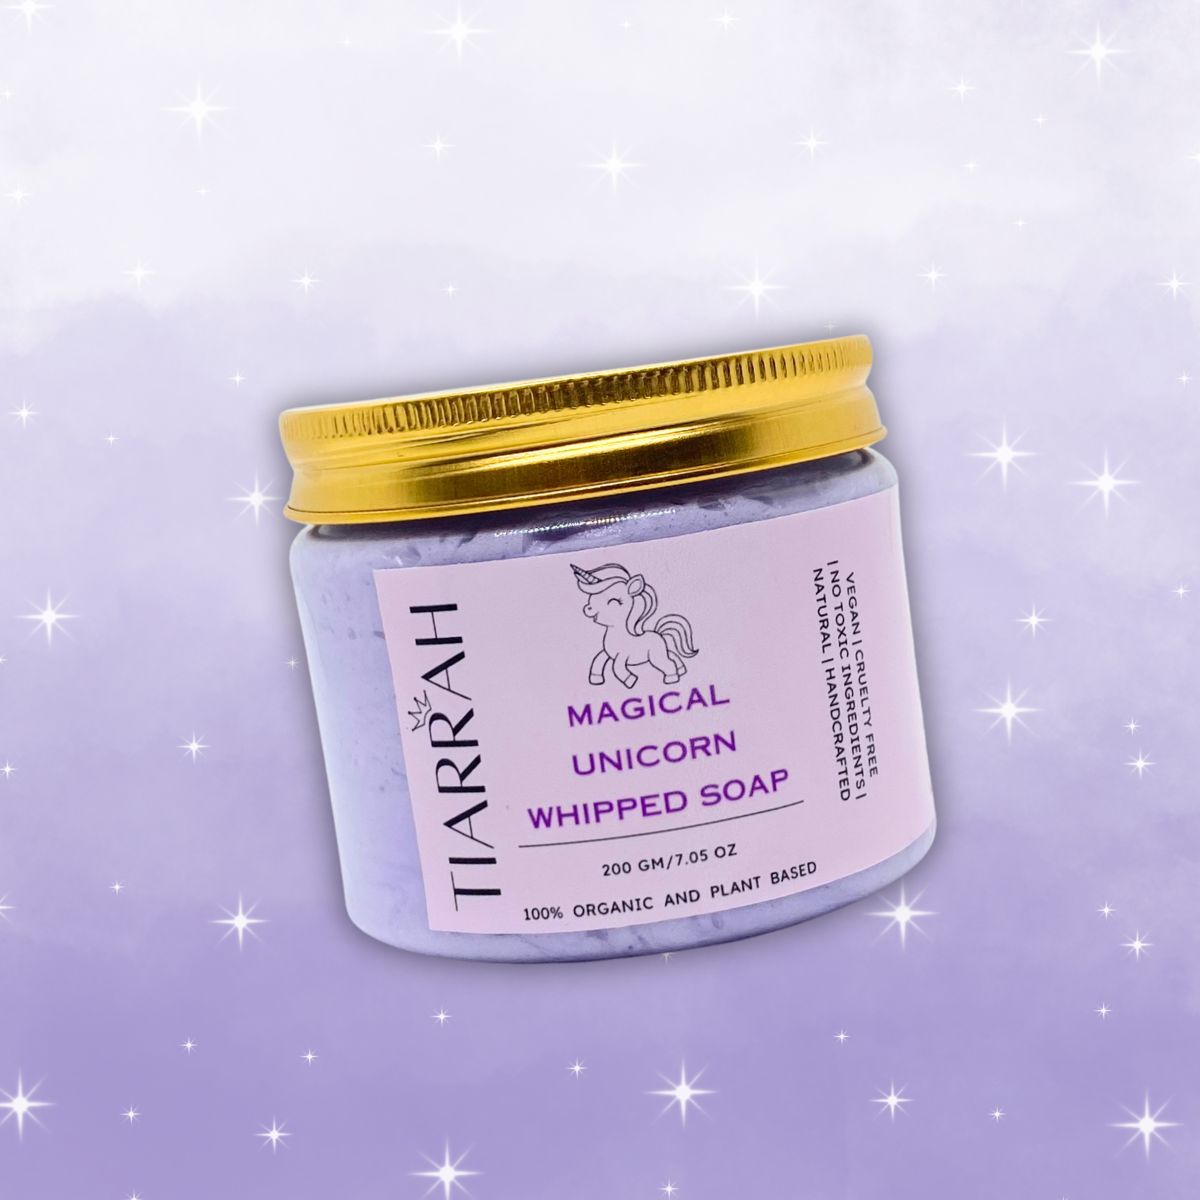 Luxury Magical Unicorn Whipped Soap by Tiarrah: Organic, Non-Toxic - The Luxury Bath and Body Care Shop